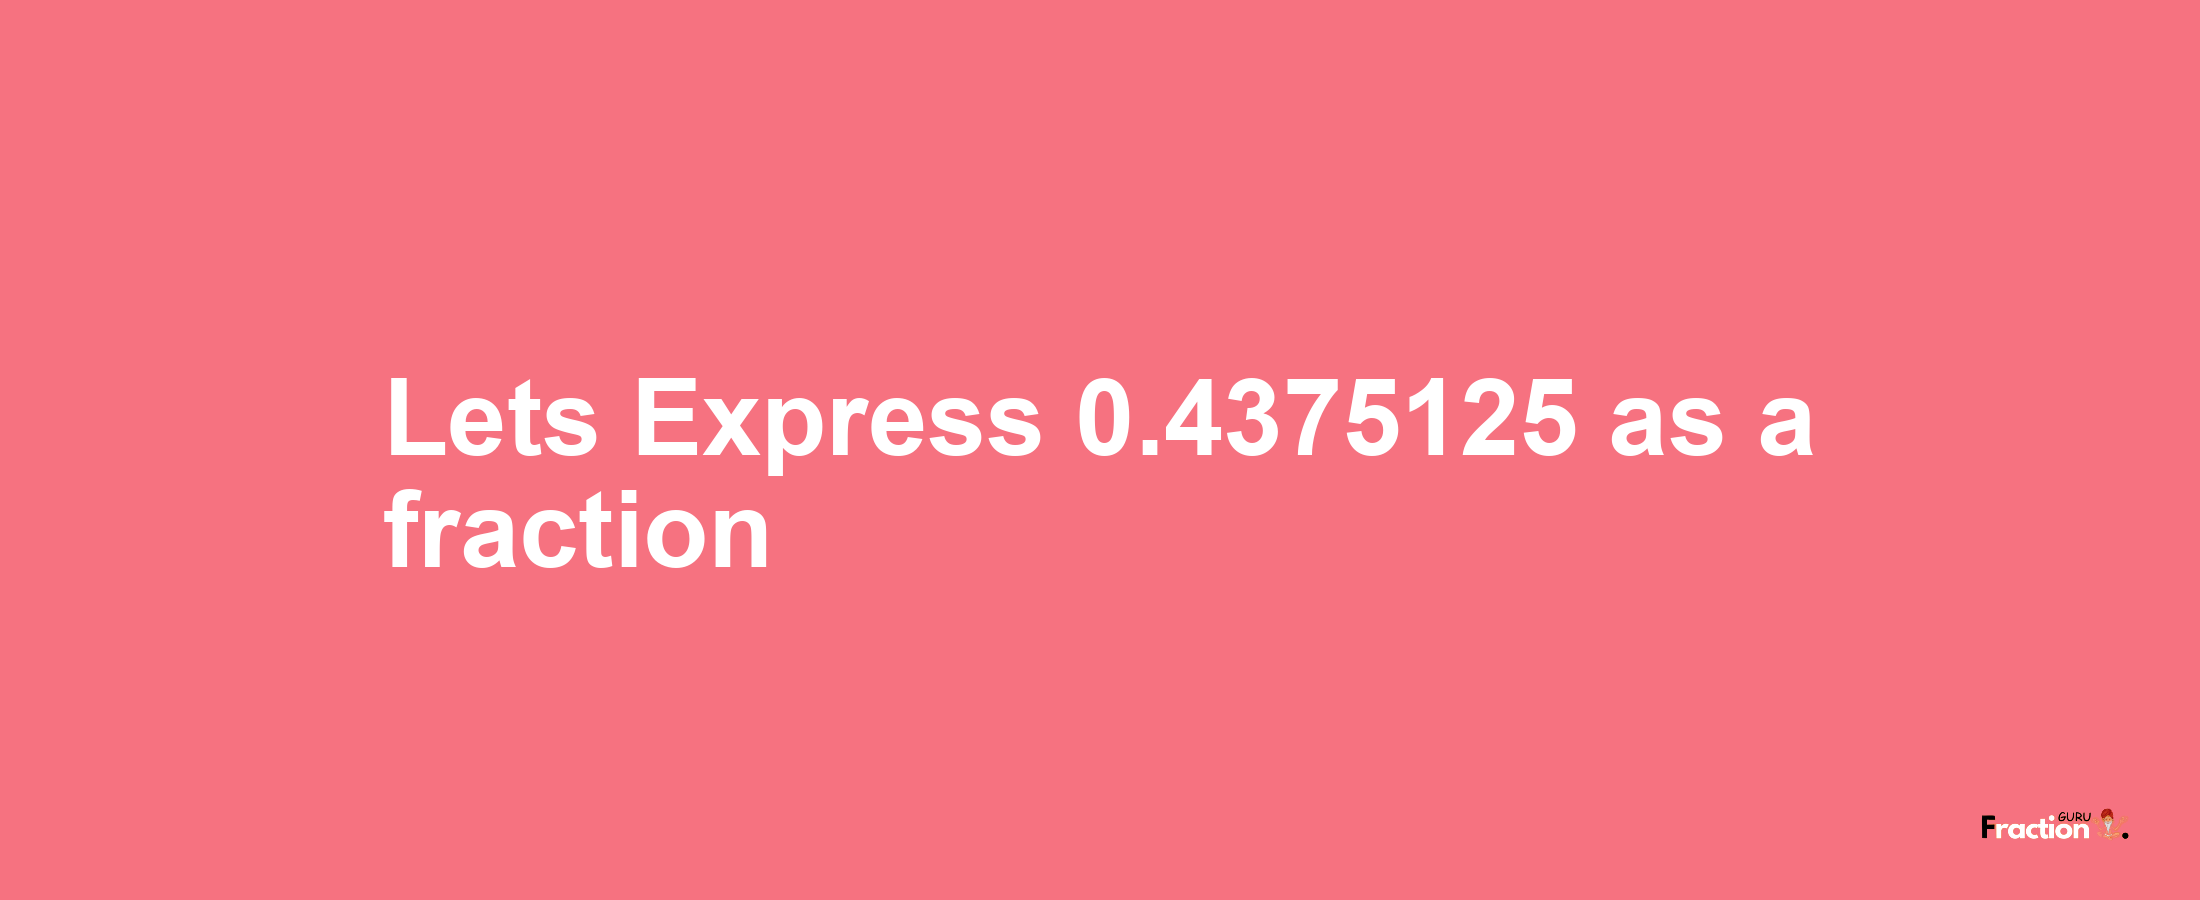 Lets Express 0.4375125 as afraction